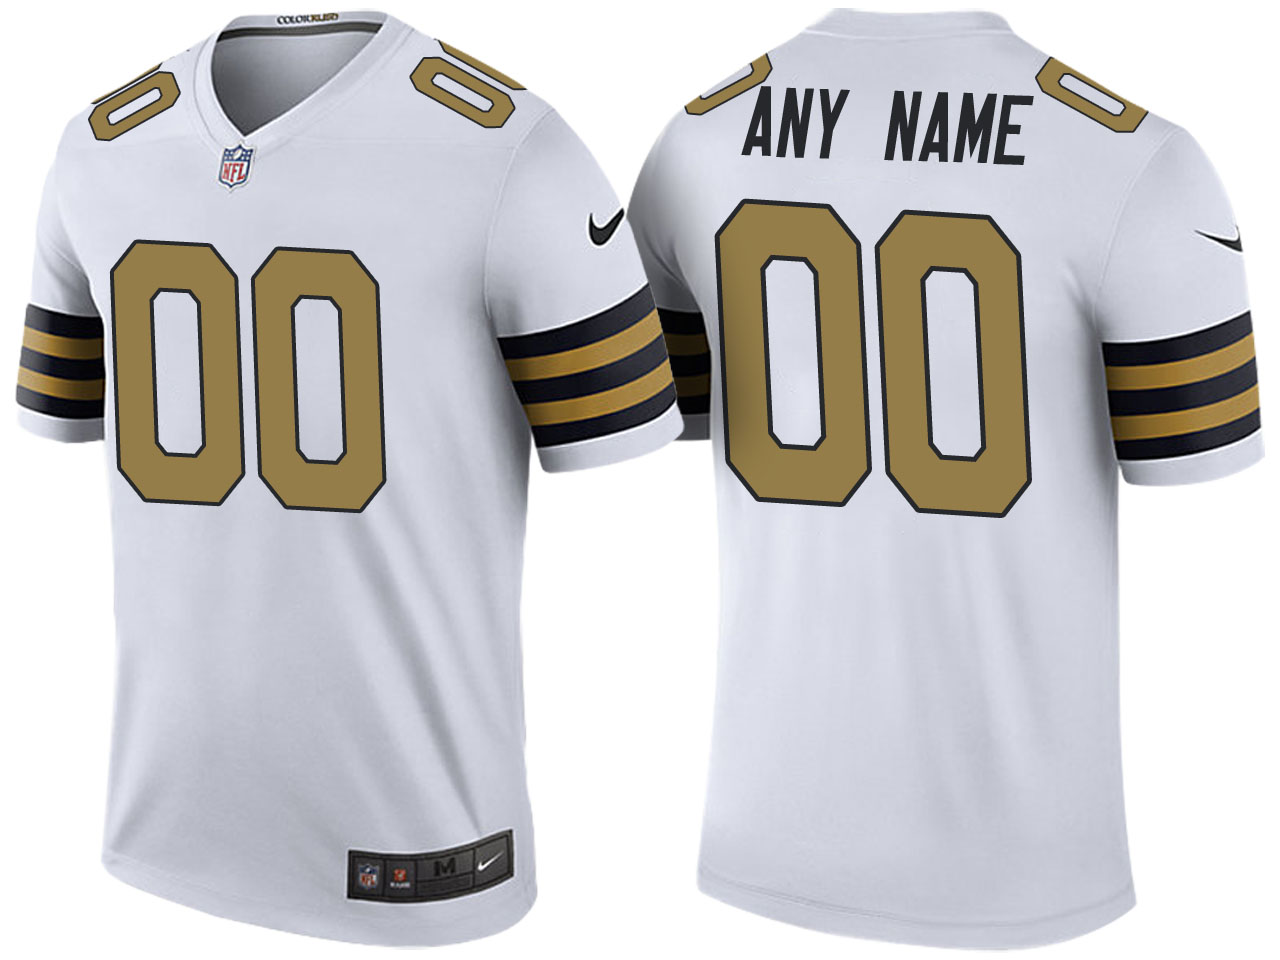 Women's Custom New Orleans Saints Nike White Color Rush Limited Lady Personal Football Jersey